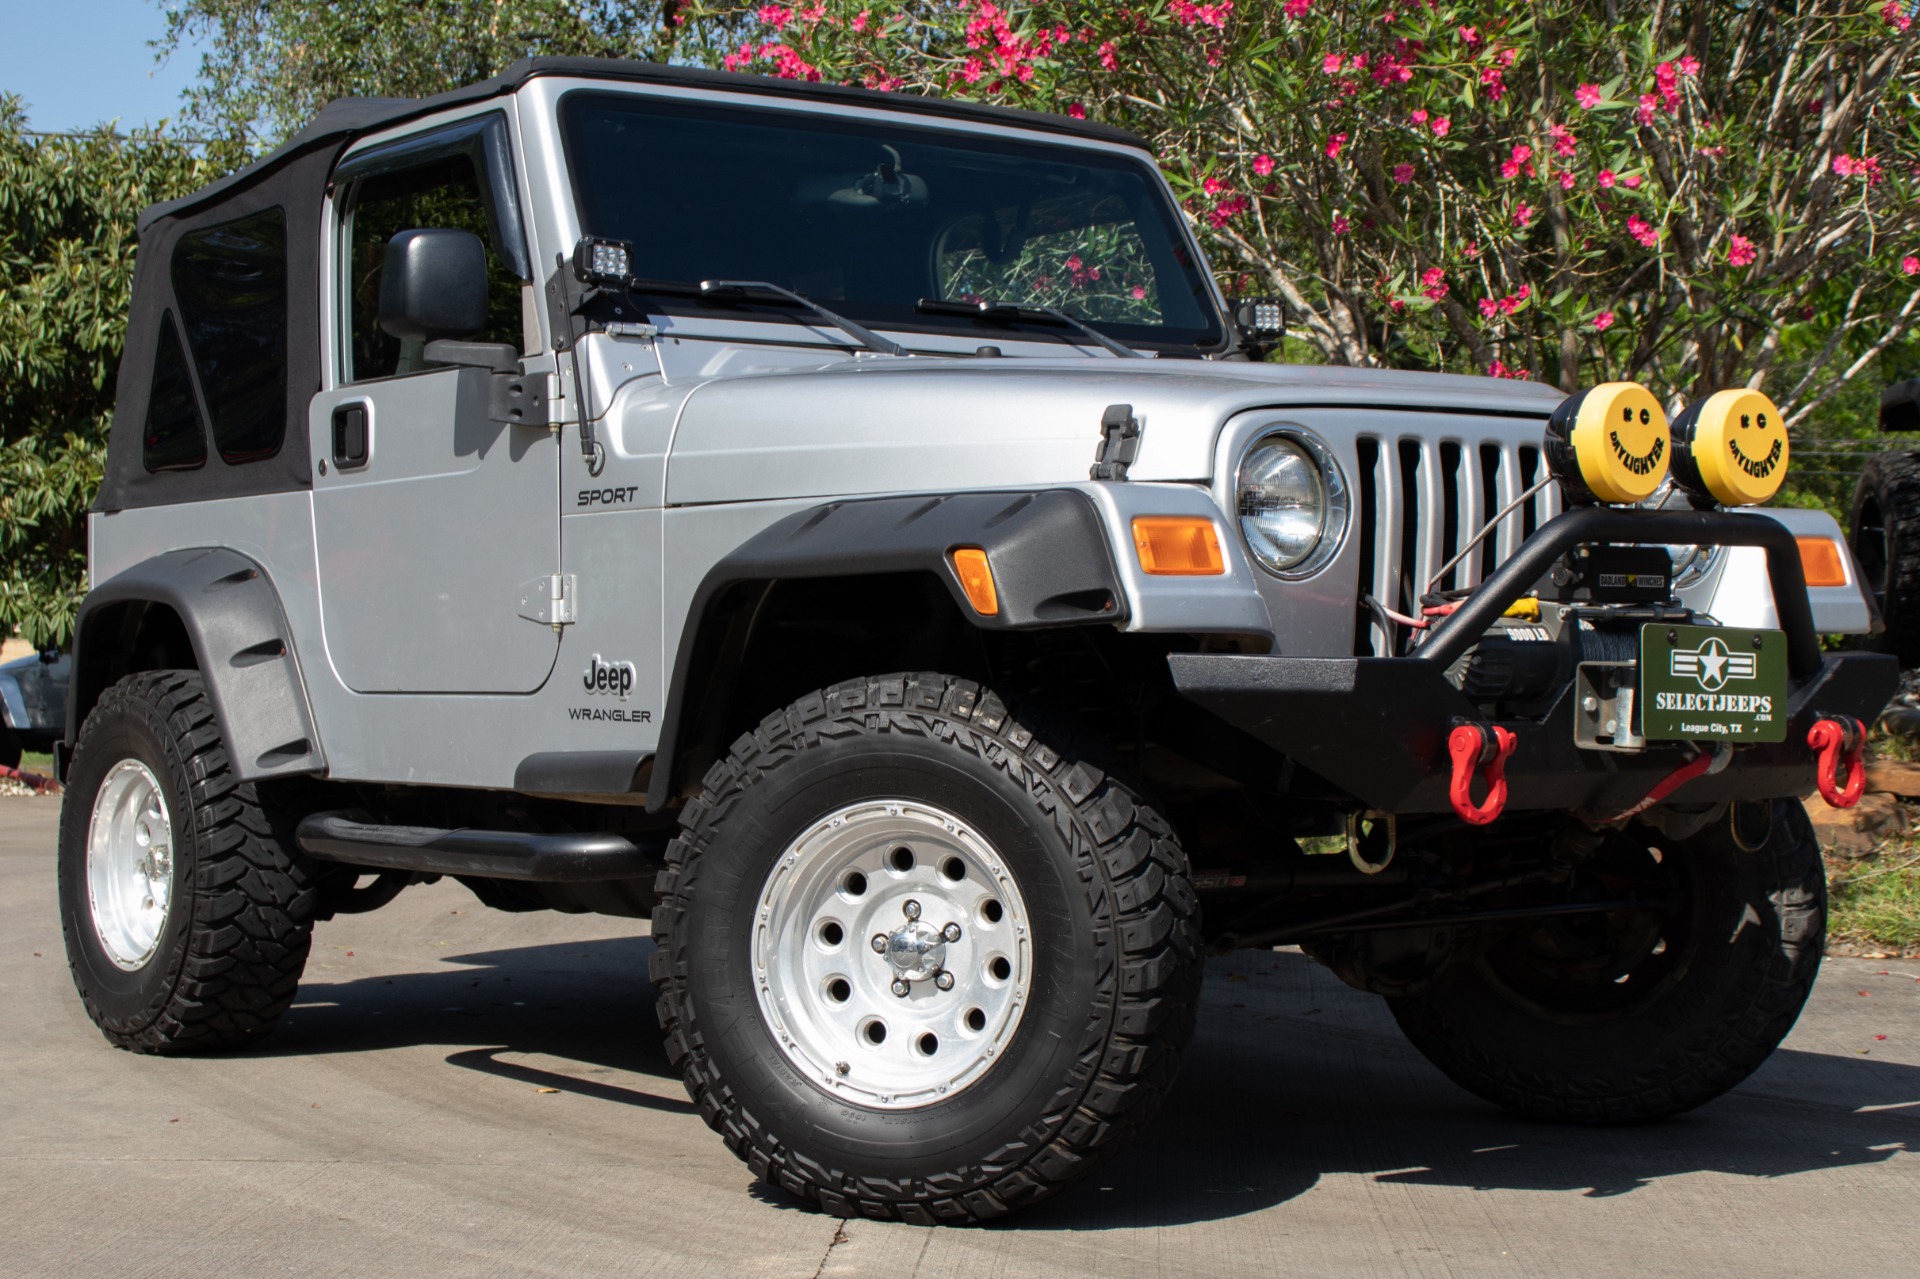 Used 2006 Jeep Wrangler Sport For Sale ($14,995) | Select Jeeps Inc. Stock  #745881